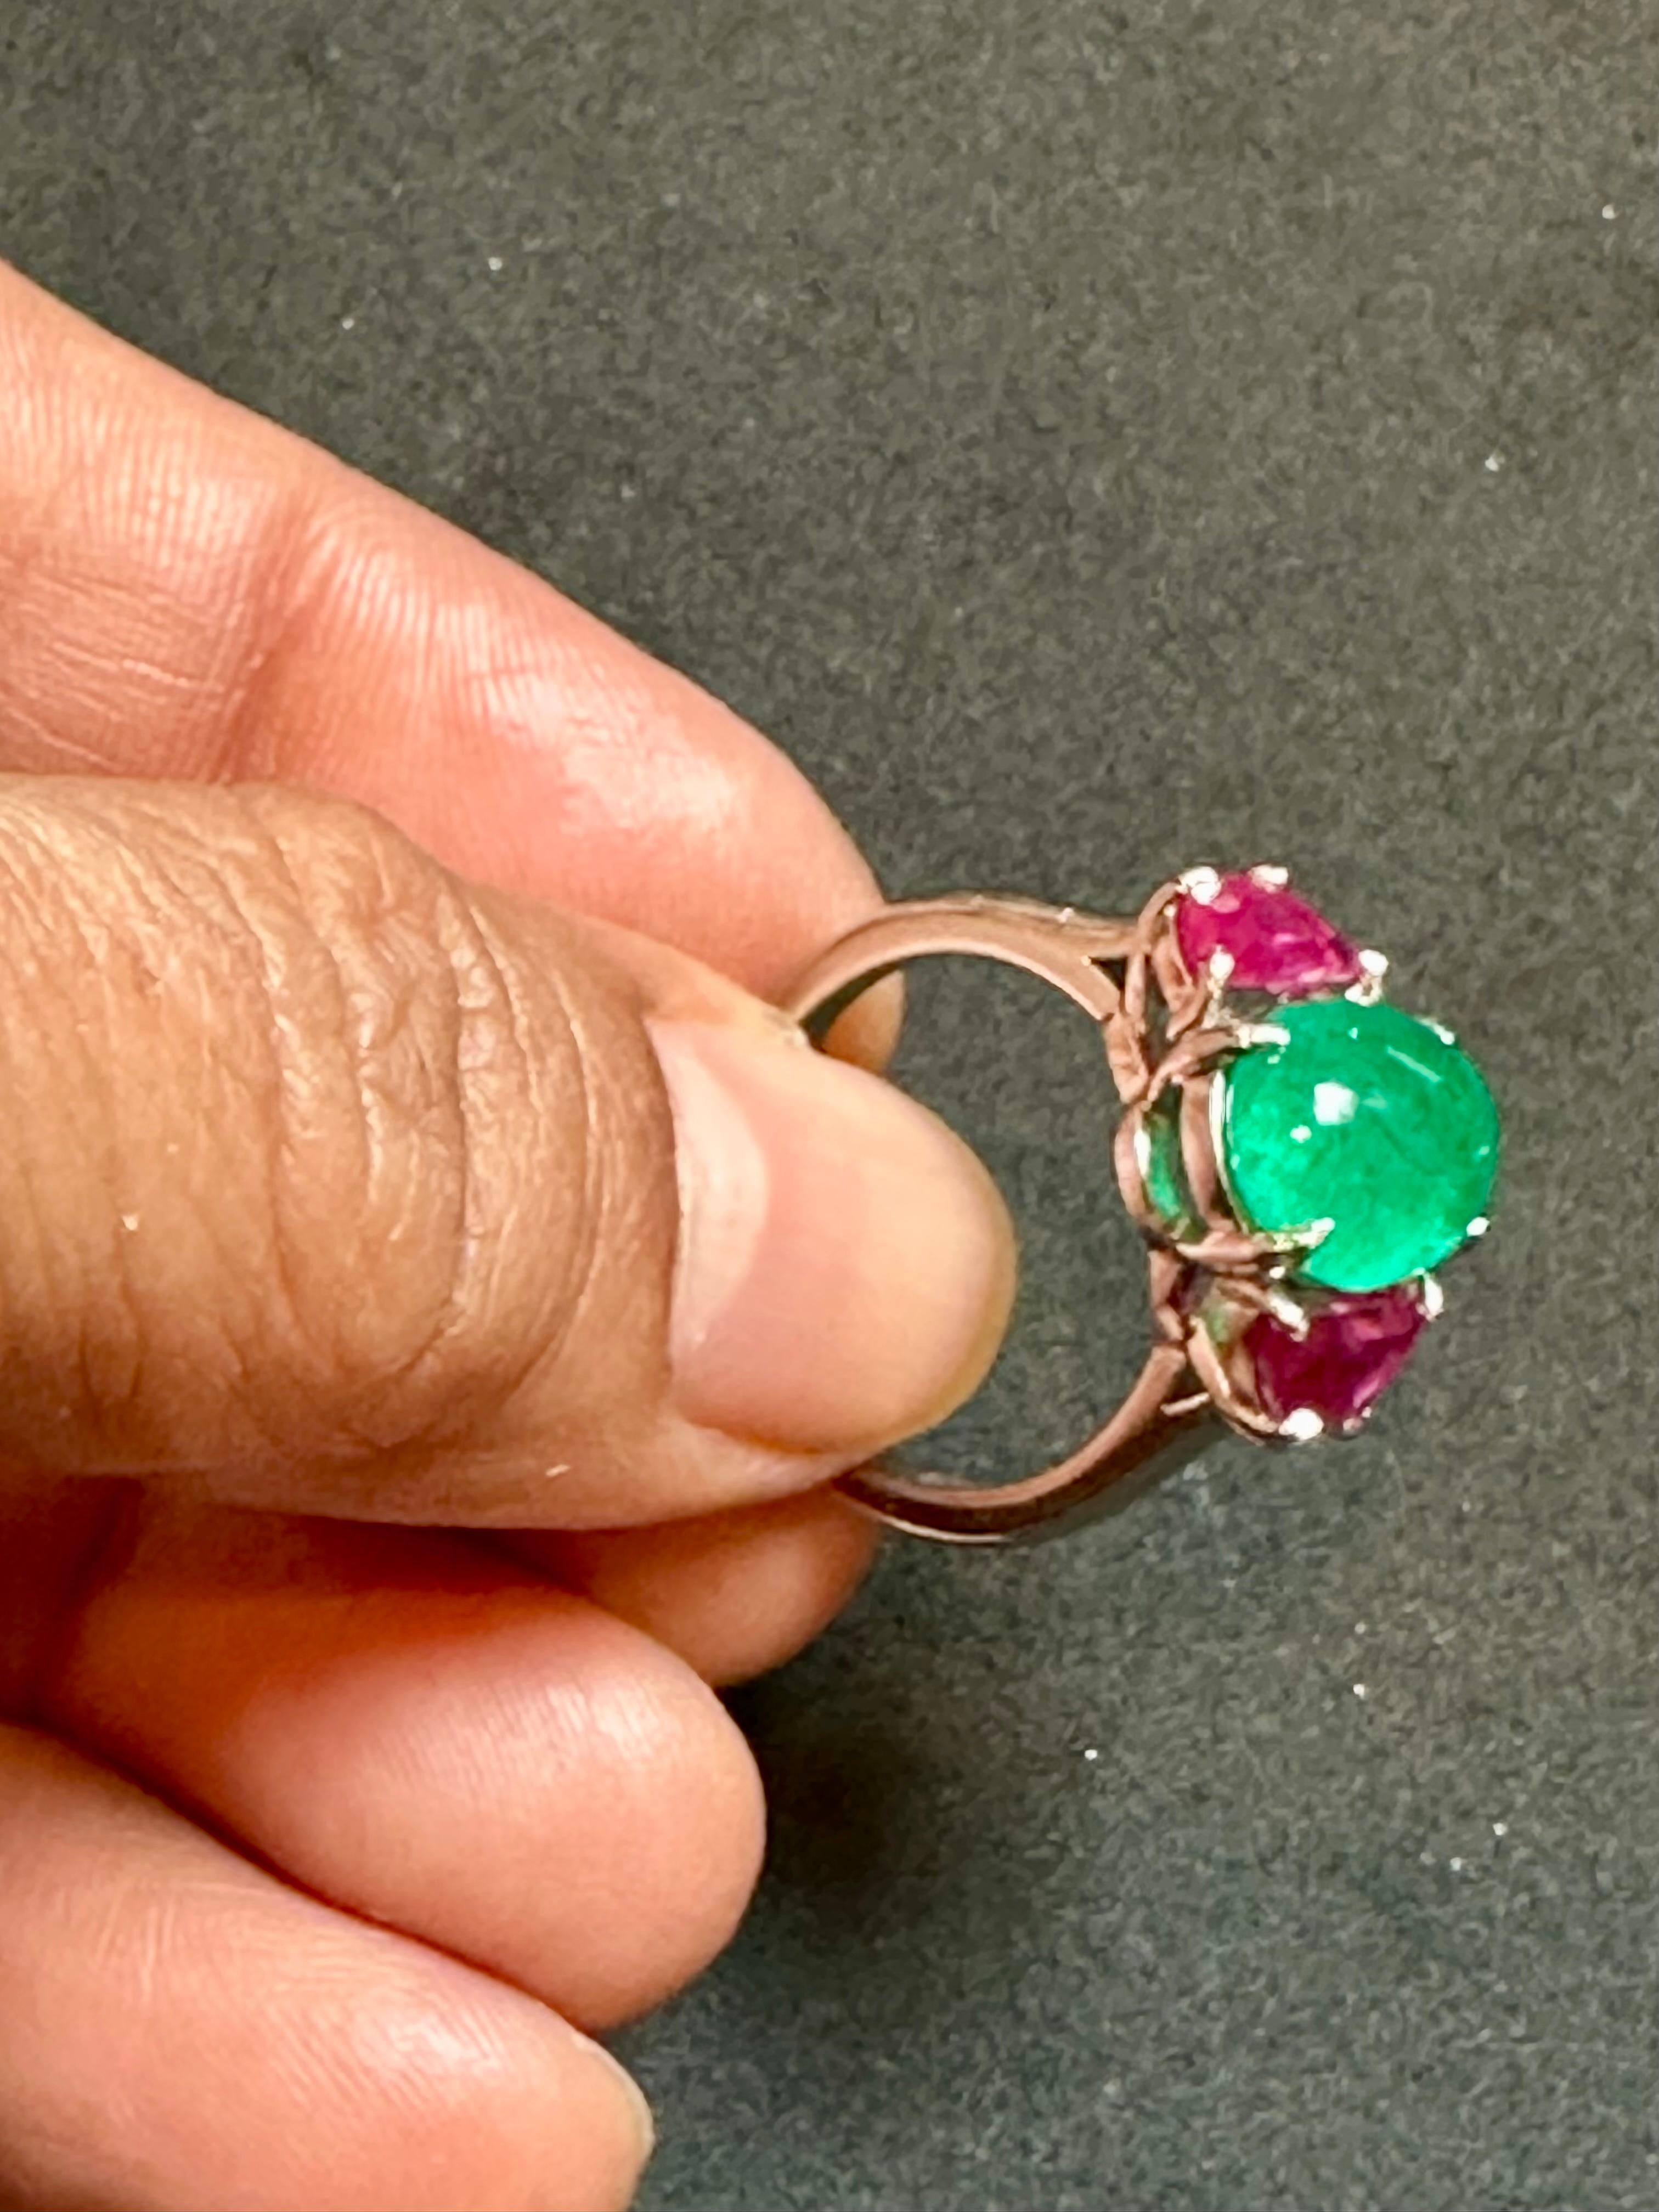 Natural 3.5 Carat Emerald Cabochon & Ruby Ring in Platinum, Estate Size 6
A classic design  ring , Ring Size 6
Approximately 3.5 Carat  emerald Cabochon Absolutely gorgeous emerald , Very desirable color .
Origin Zambia
 Platinum  8.33  gm with